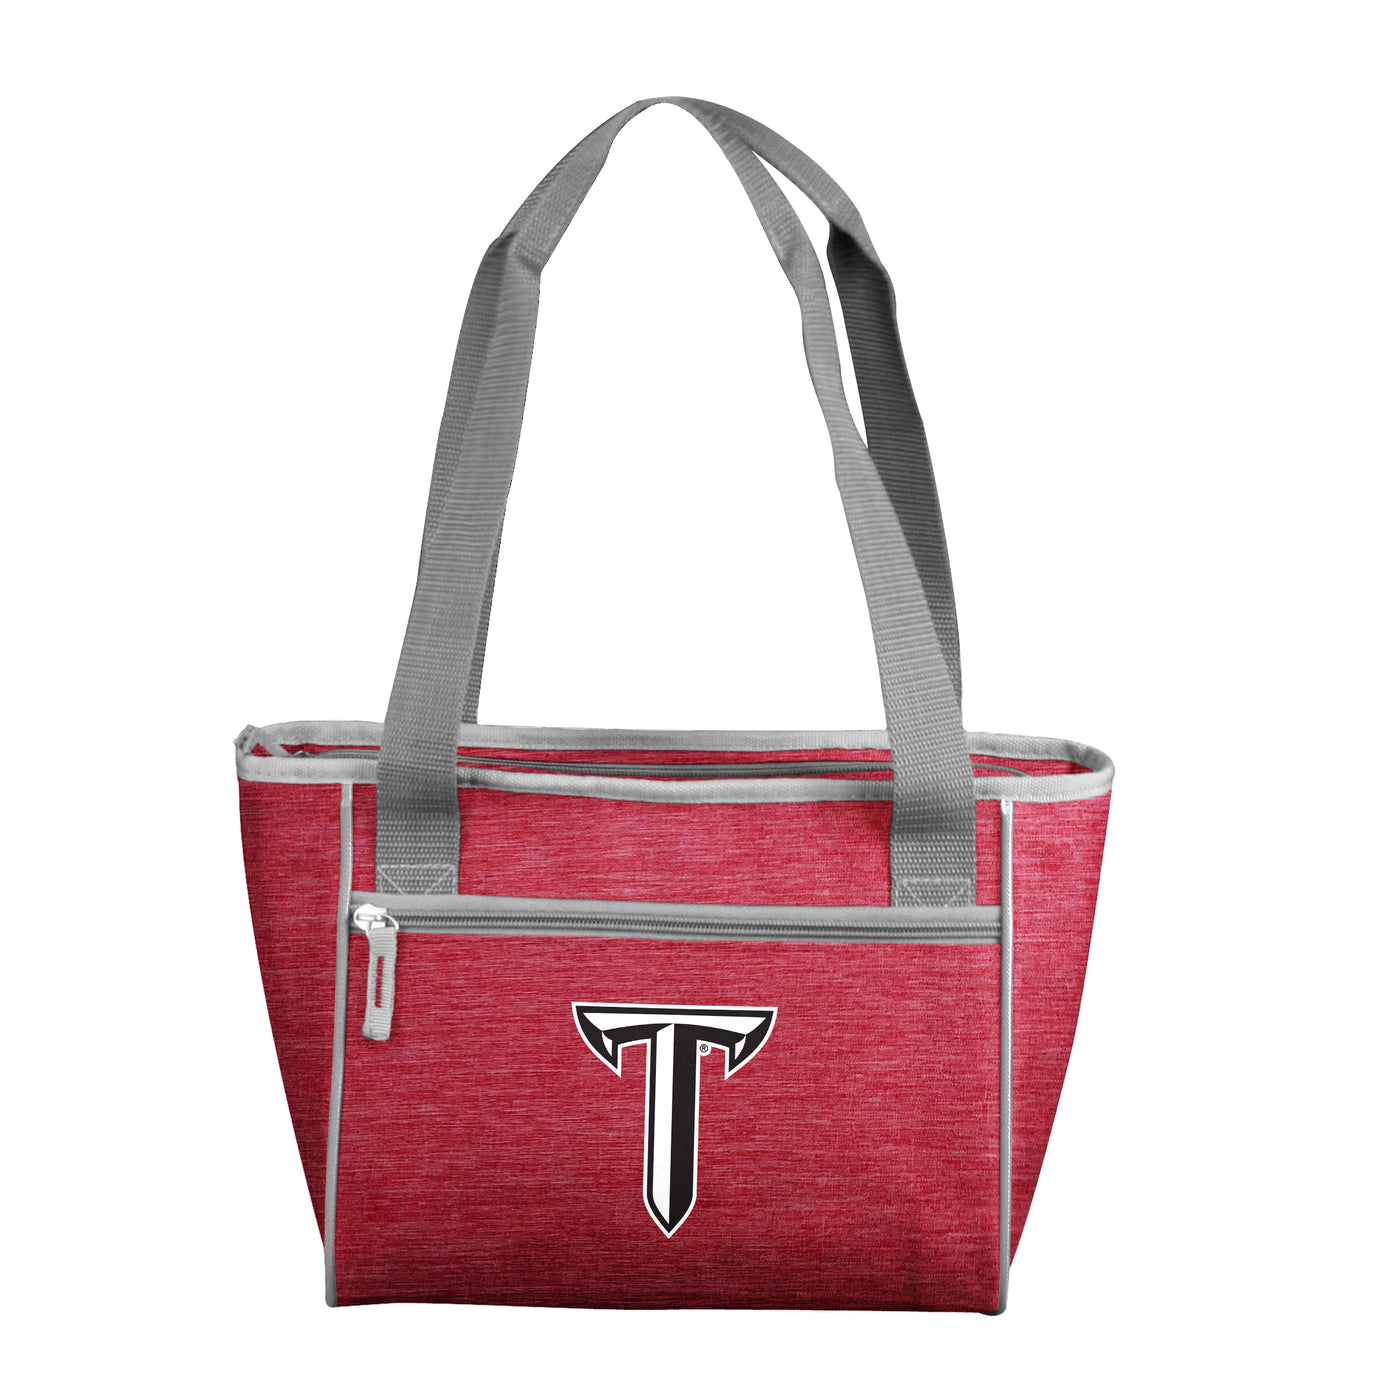 Troy University Crosshatch 16 Can Cooler Tote